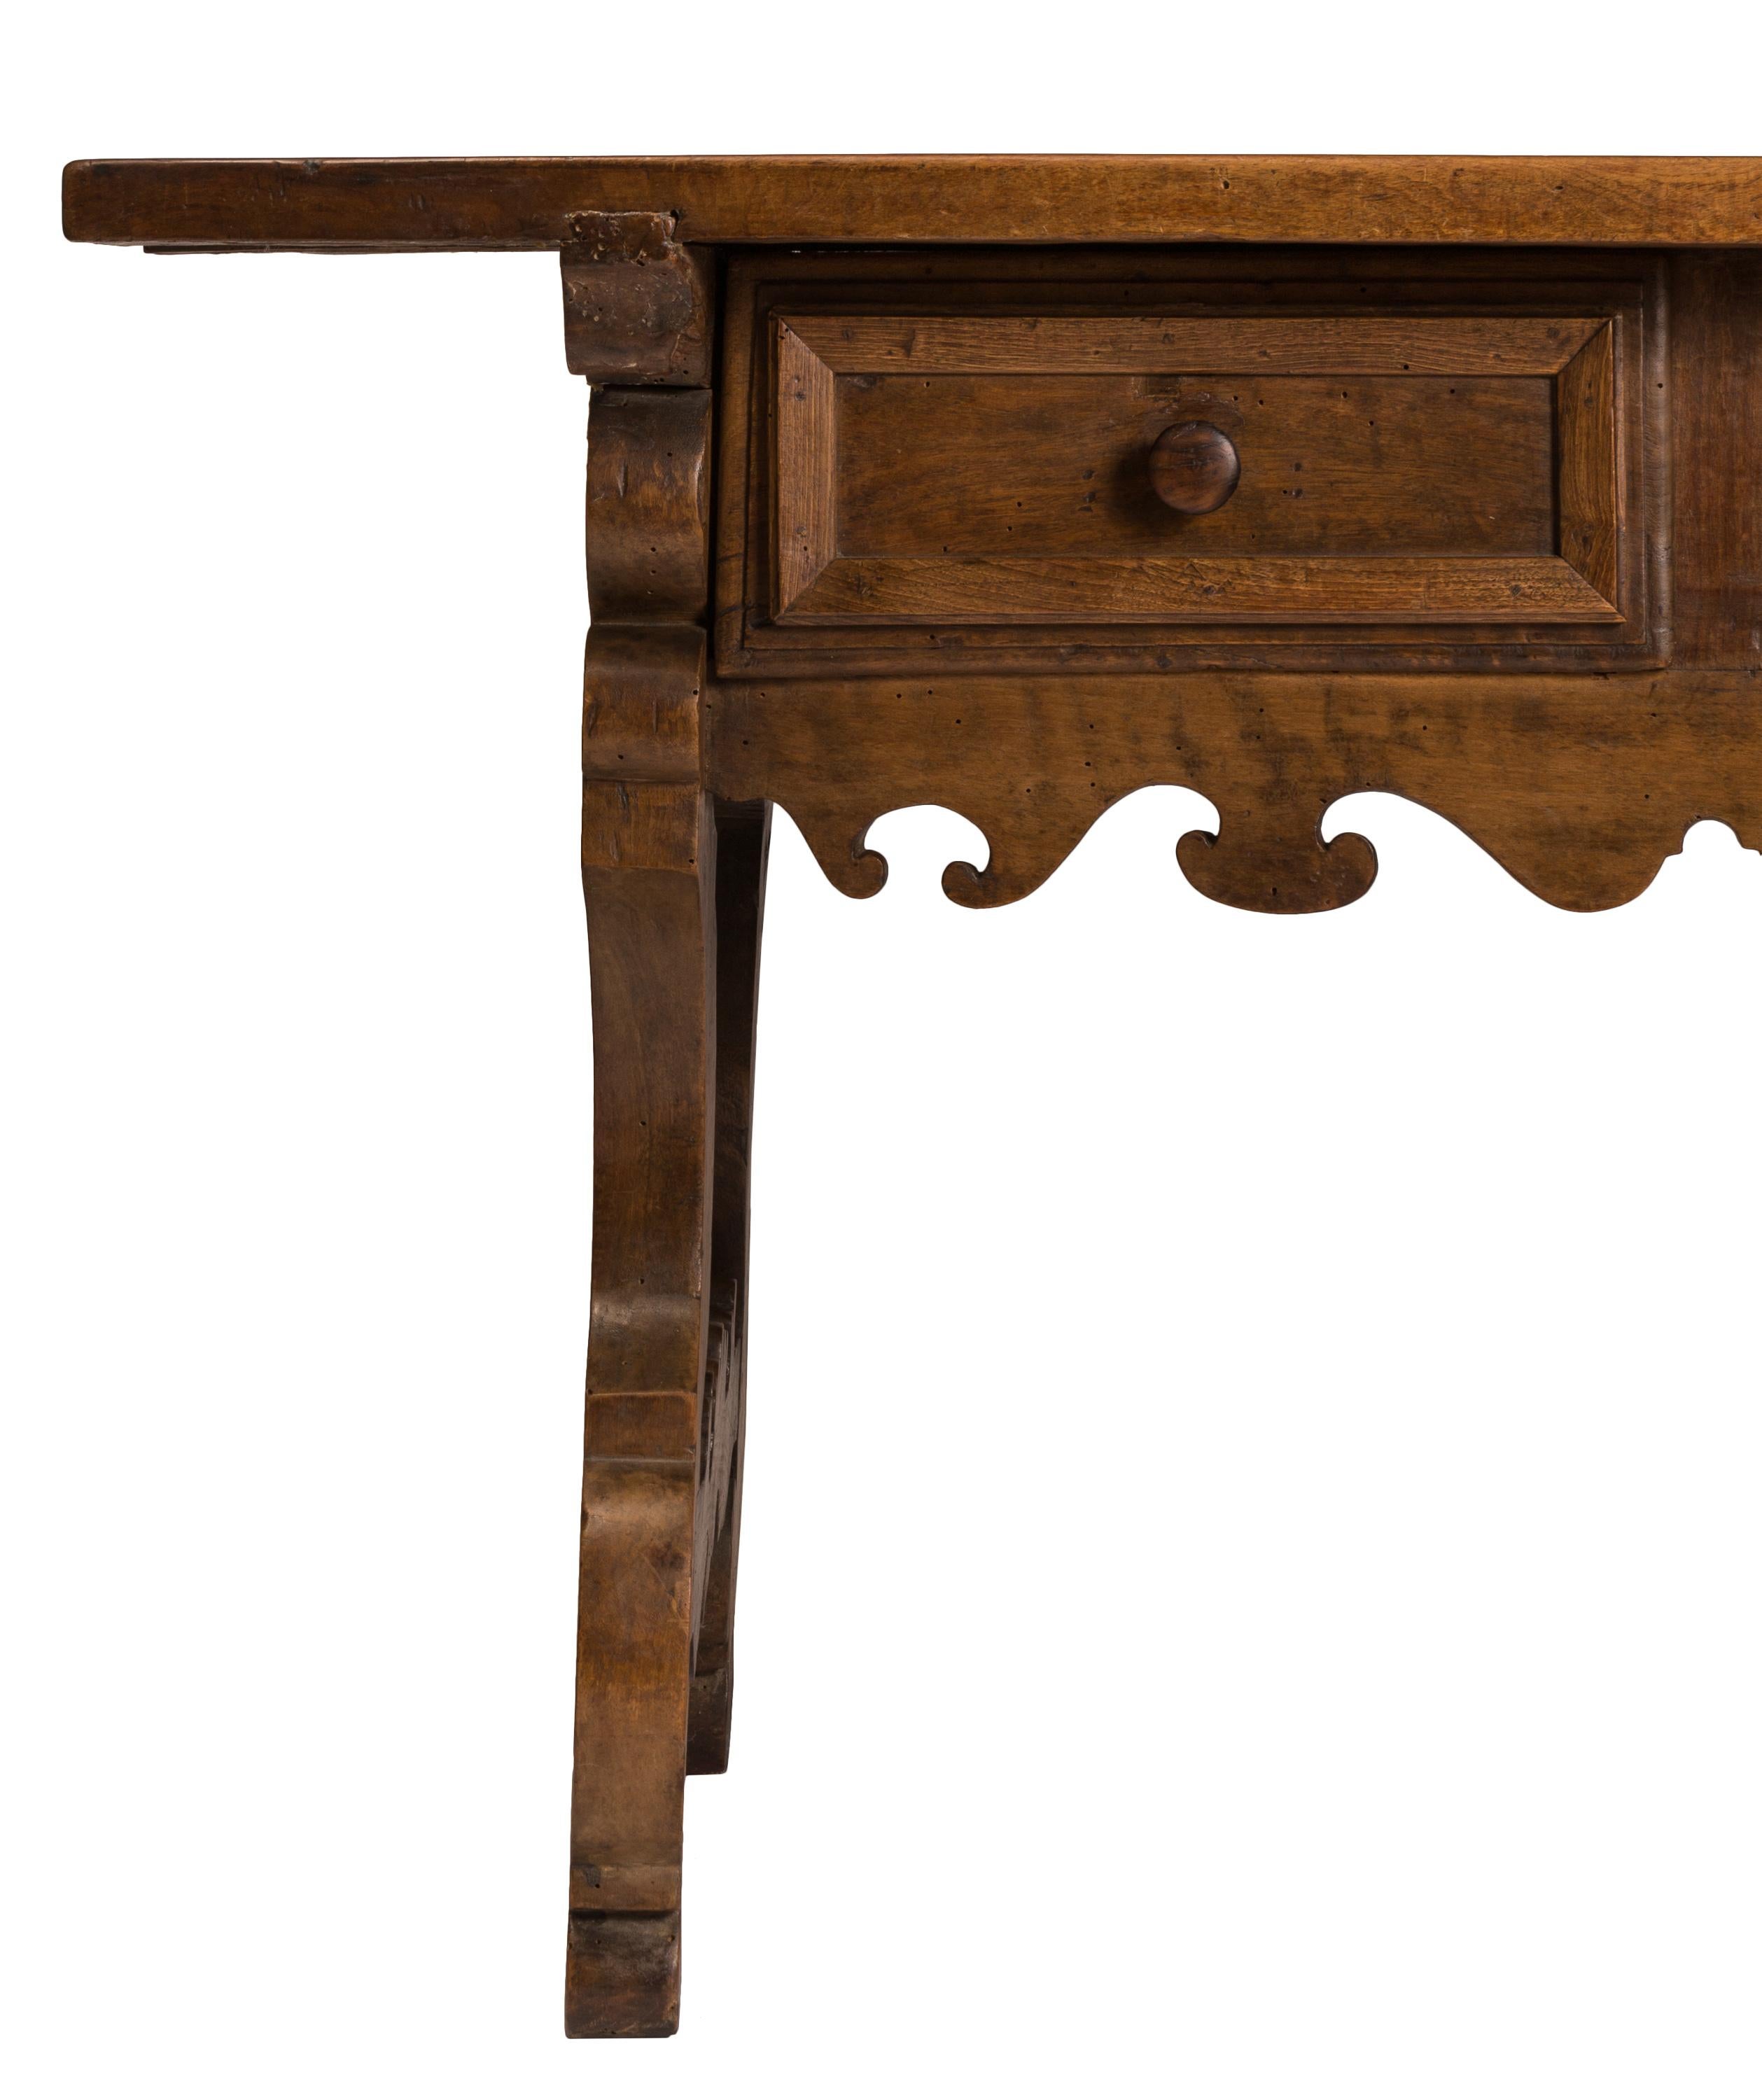 Carved 18th Century Spanish Baroque Trestle Style Writing Table Desk with Two Drawers For Sale